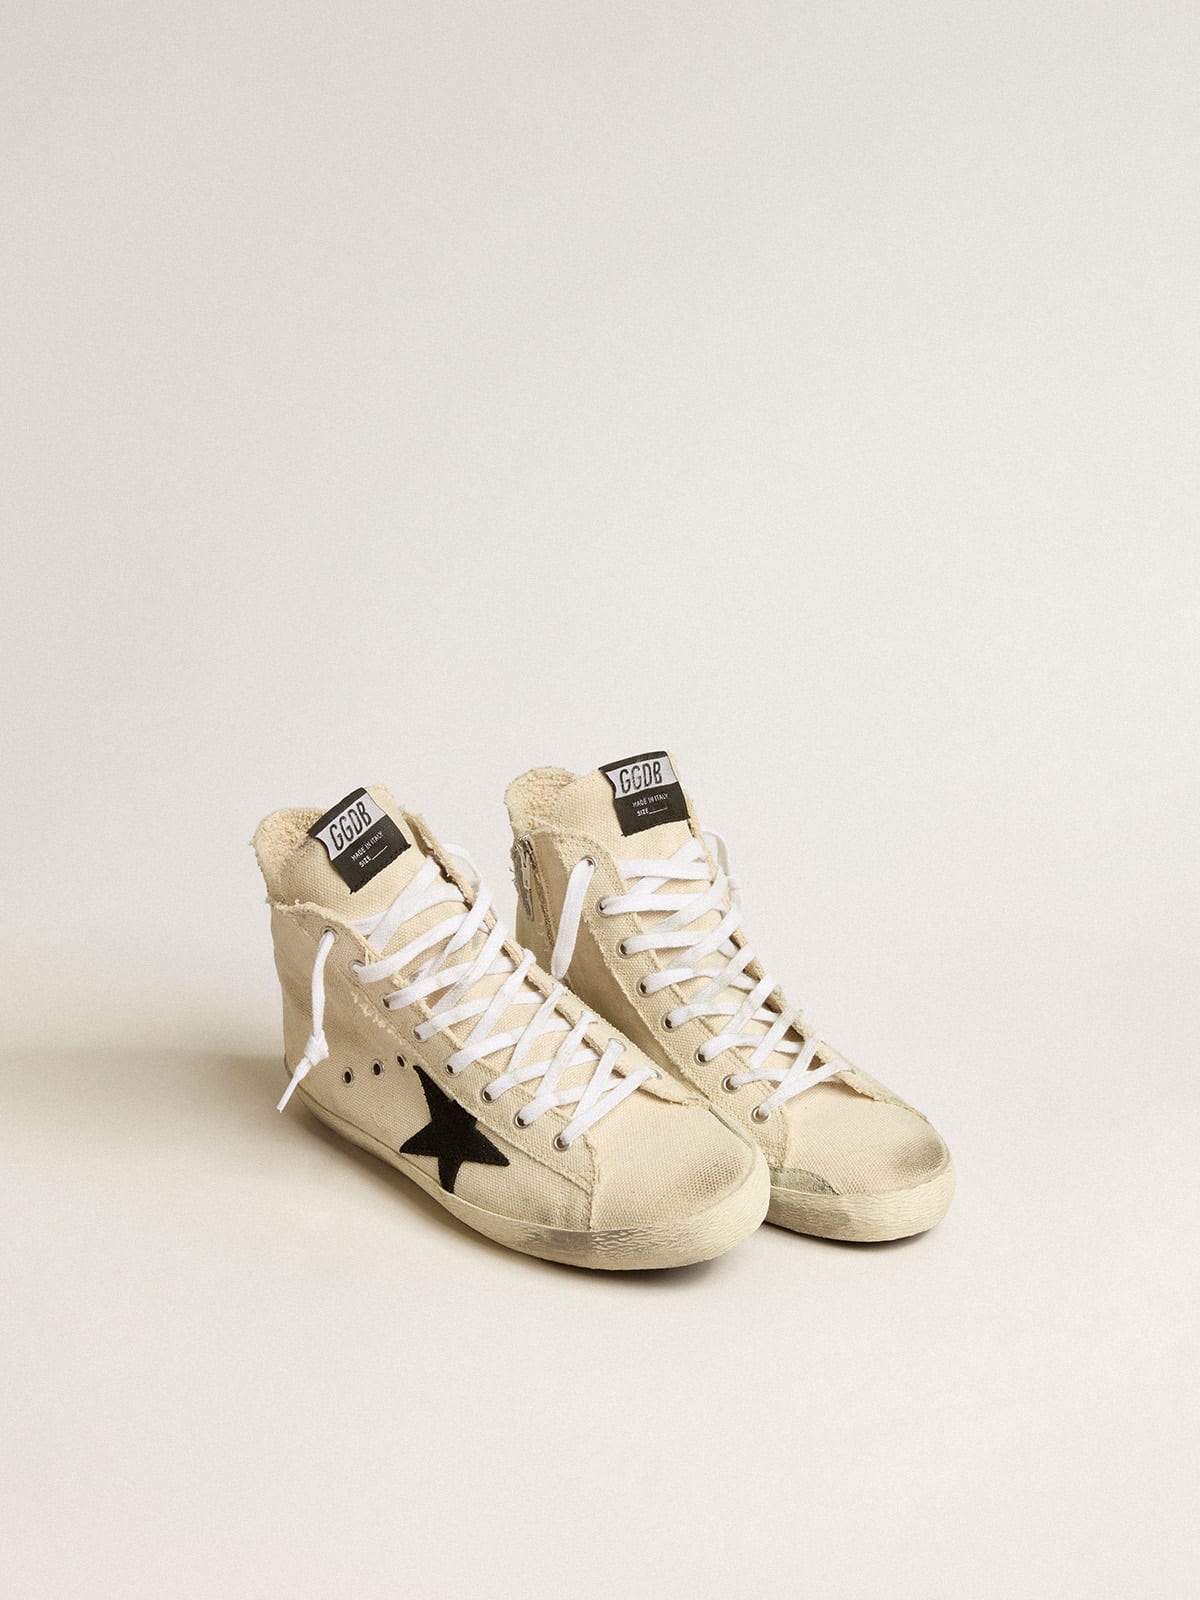 Francy Penstar in canvas with black suede star and leather heel tab |  Golden Goose